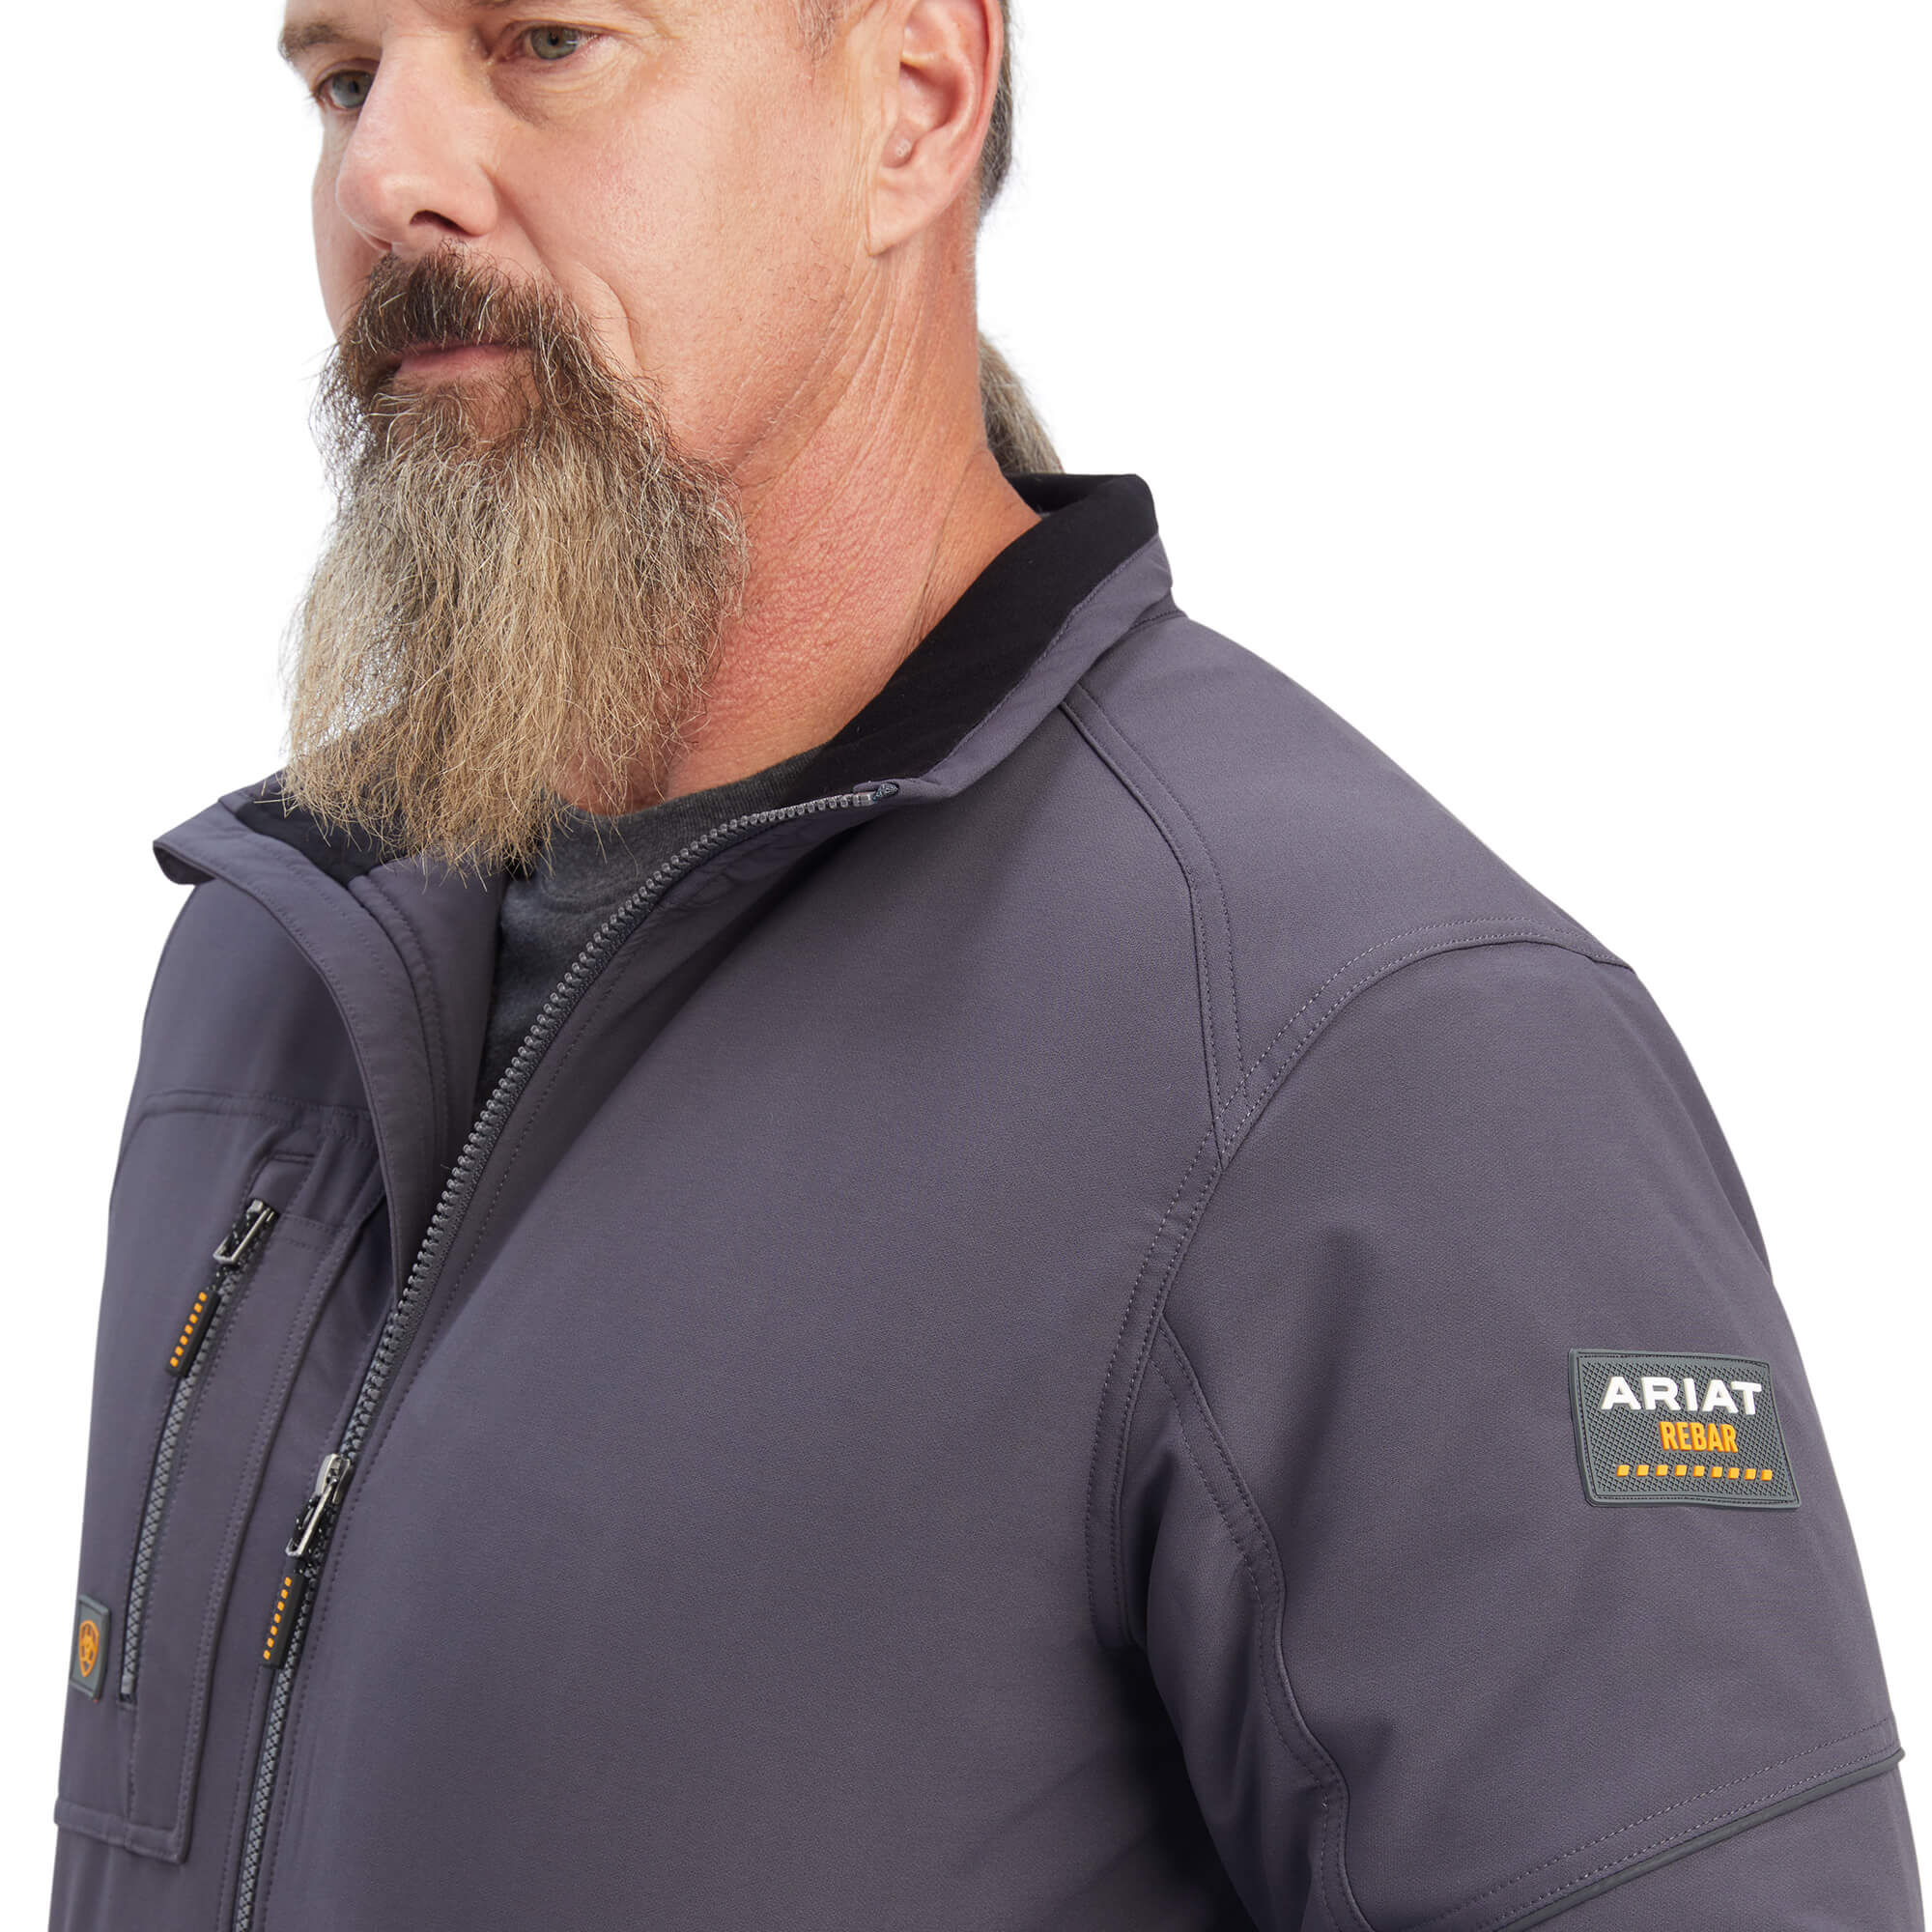 Men's Rebar DriTEK DuraStretch Insulated Jacket in Periscope Grey, Size:  Large_Tall by Ariat